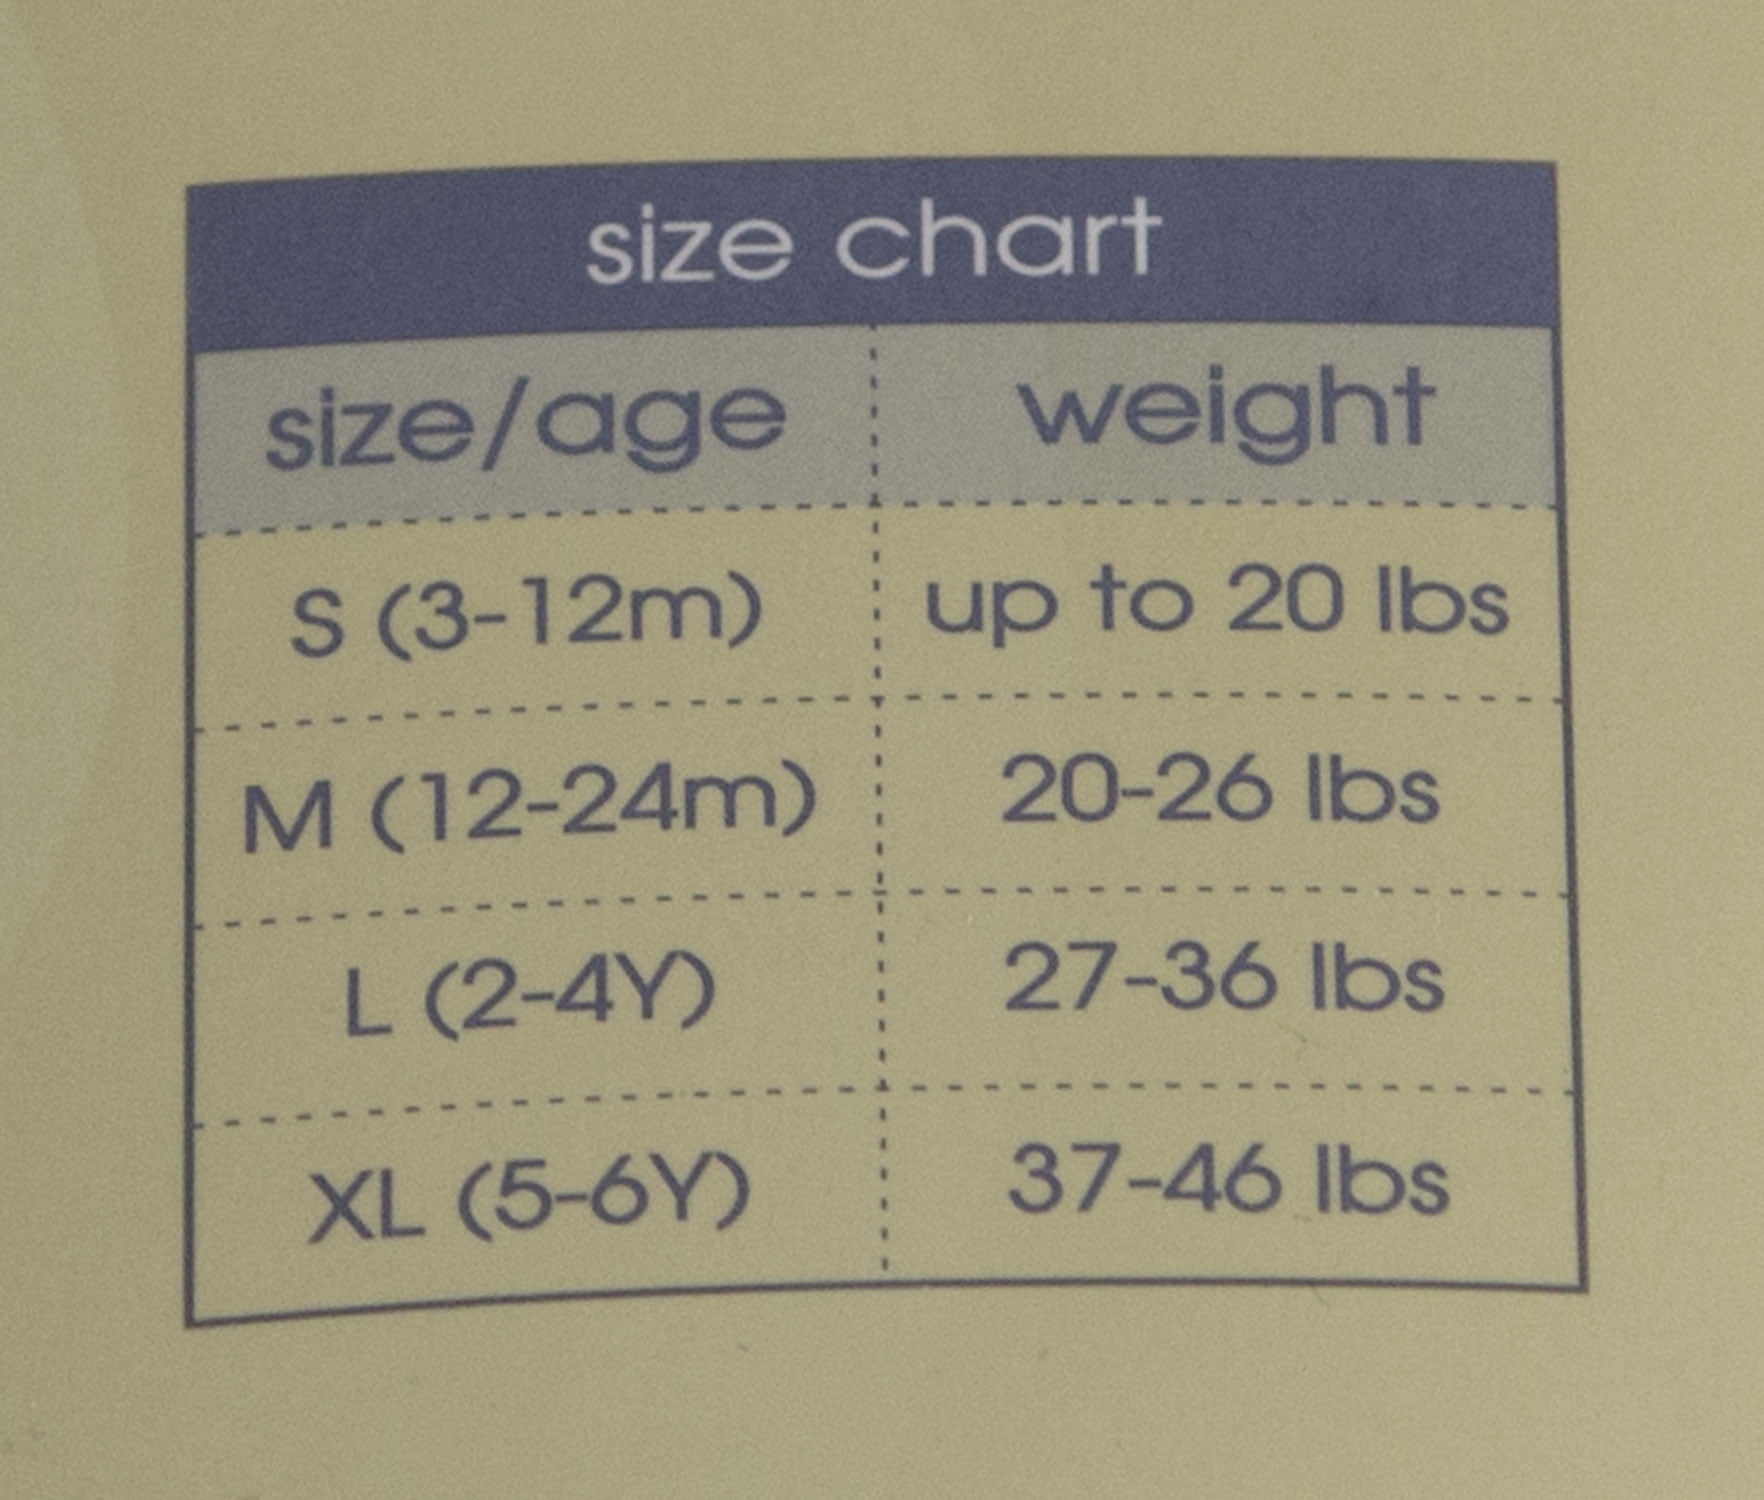 Egg By Susan Lazar Size Chart